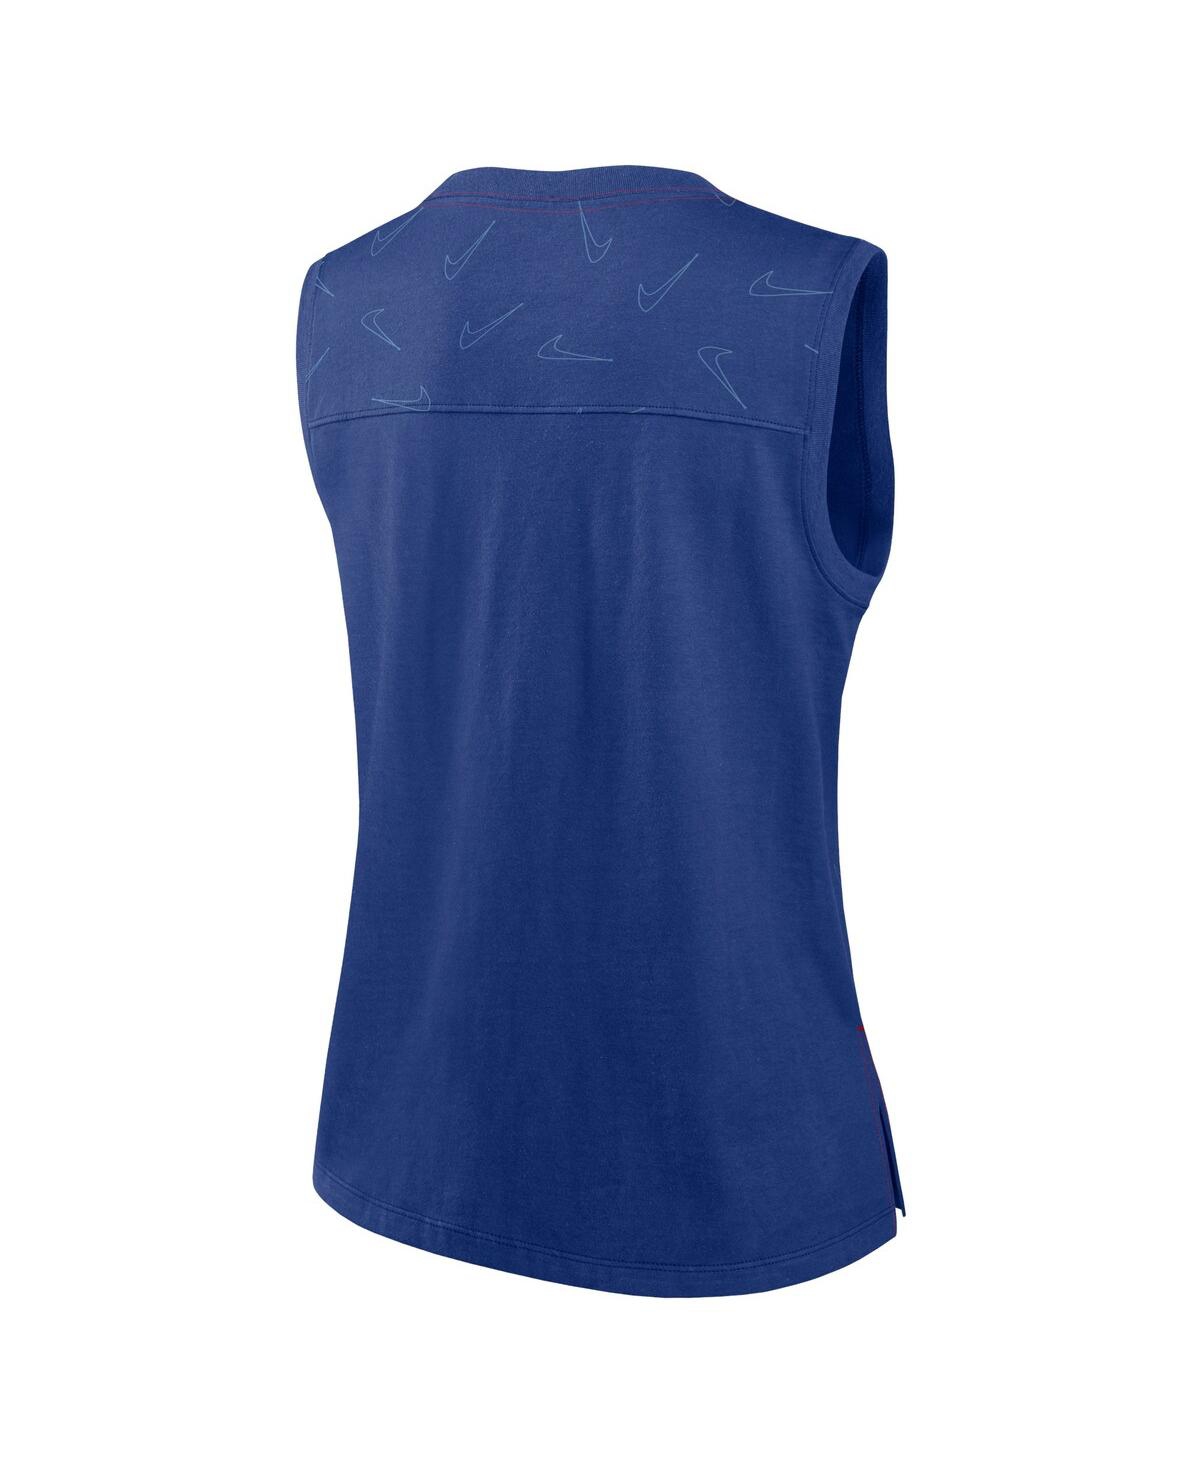 Shop Nike Women's  Royal Chicago Cubs Muscle Play Tank Top